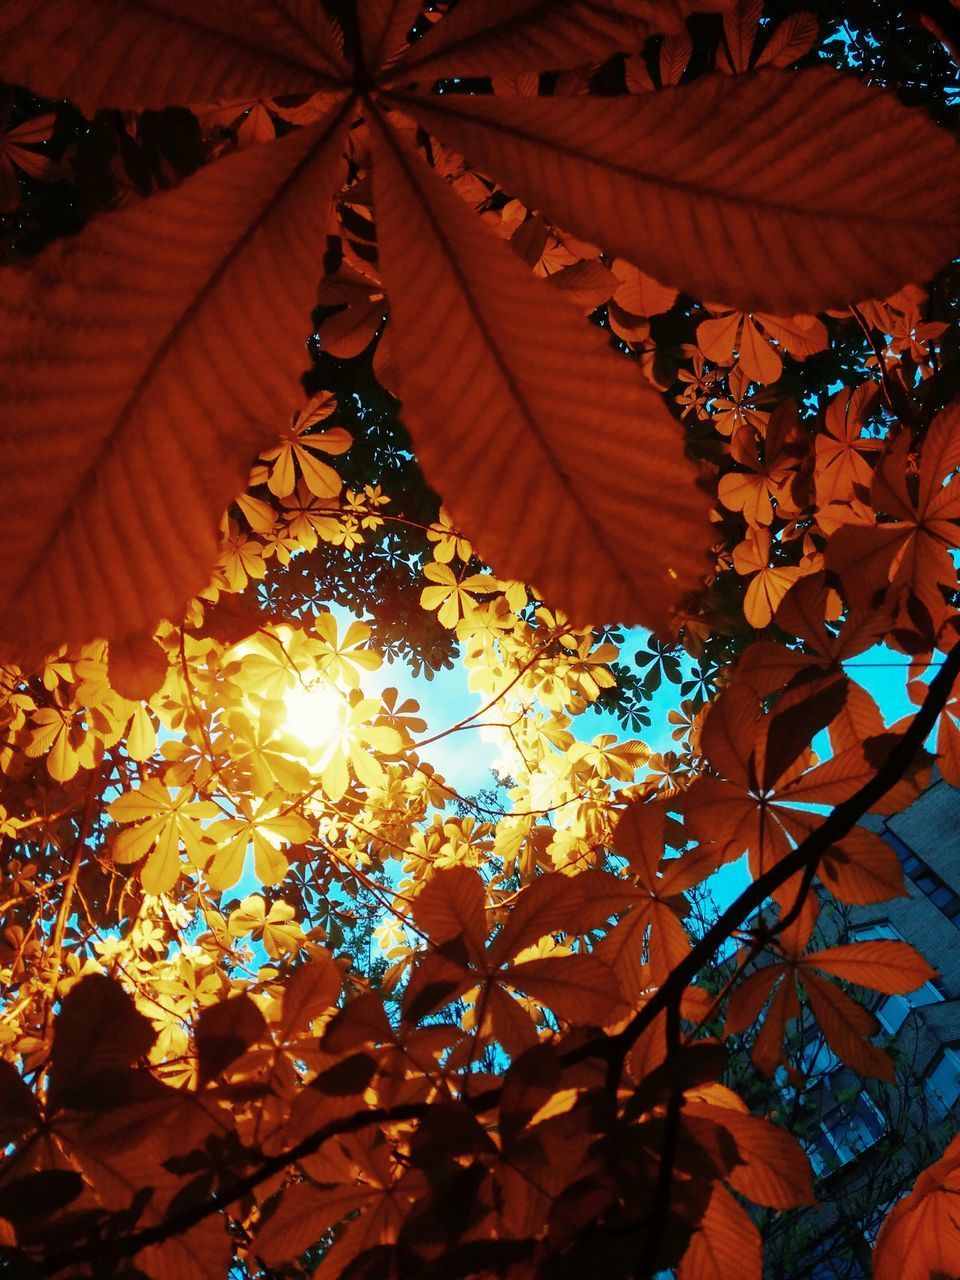 LOW ANGLE VIEW OF ILLUMINATED MAPLE LEAVES ON TREE